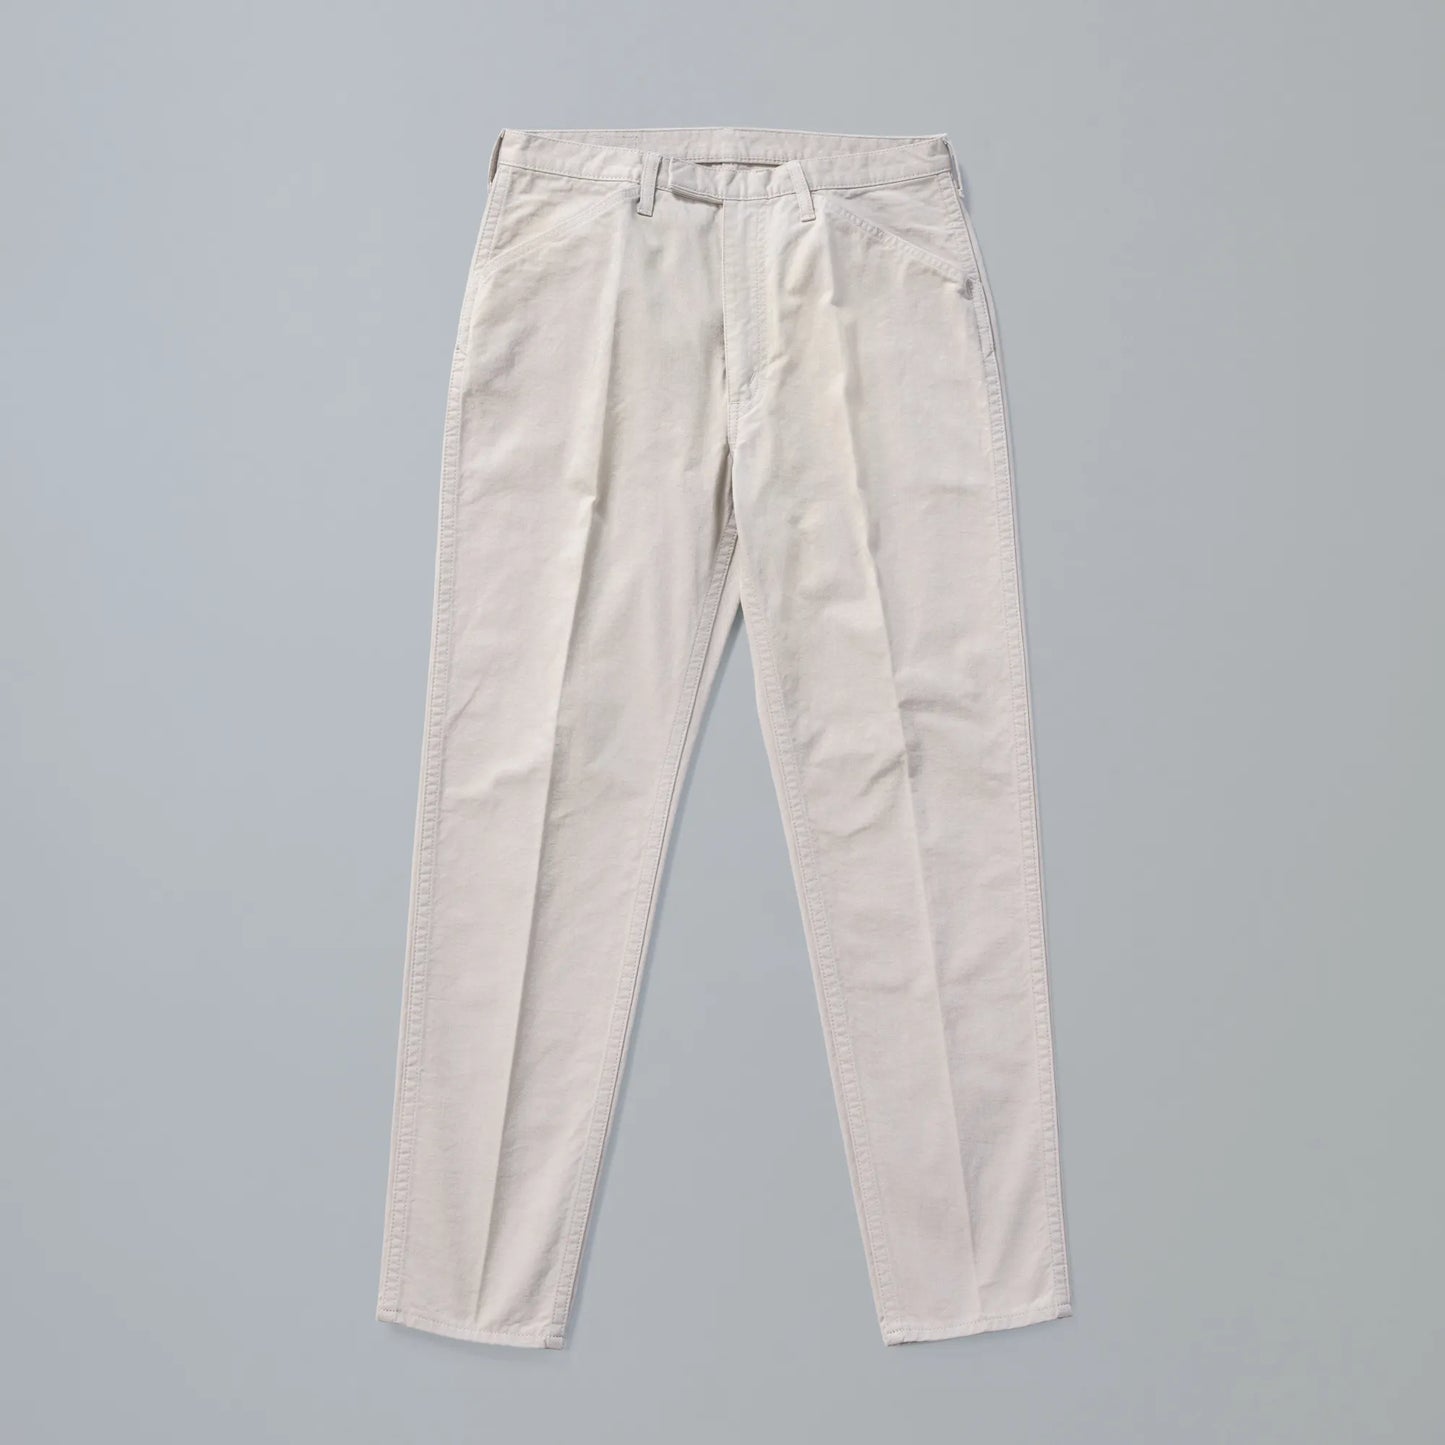 #022 LV MCQUEEN PANTS ONE-WASHED BK